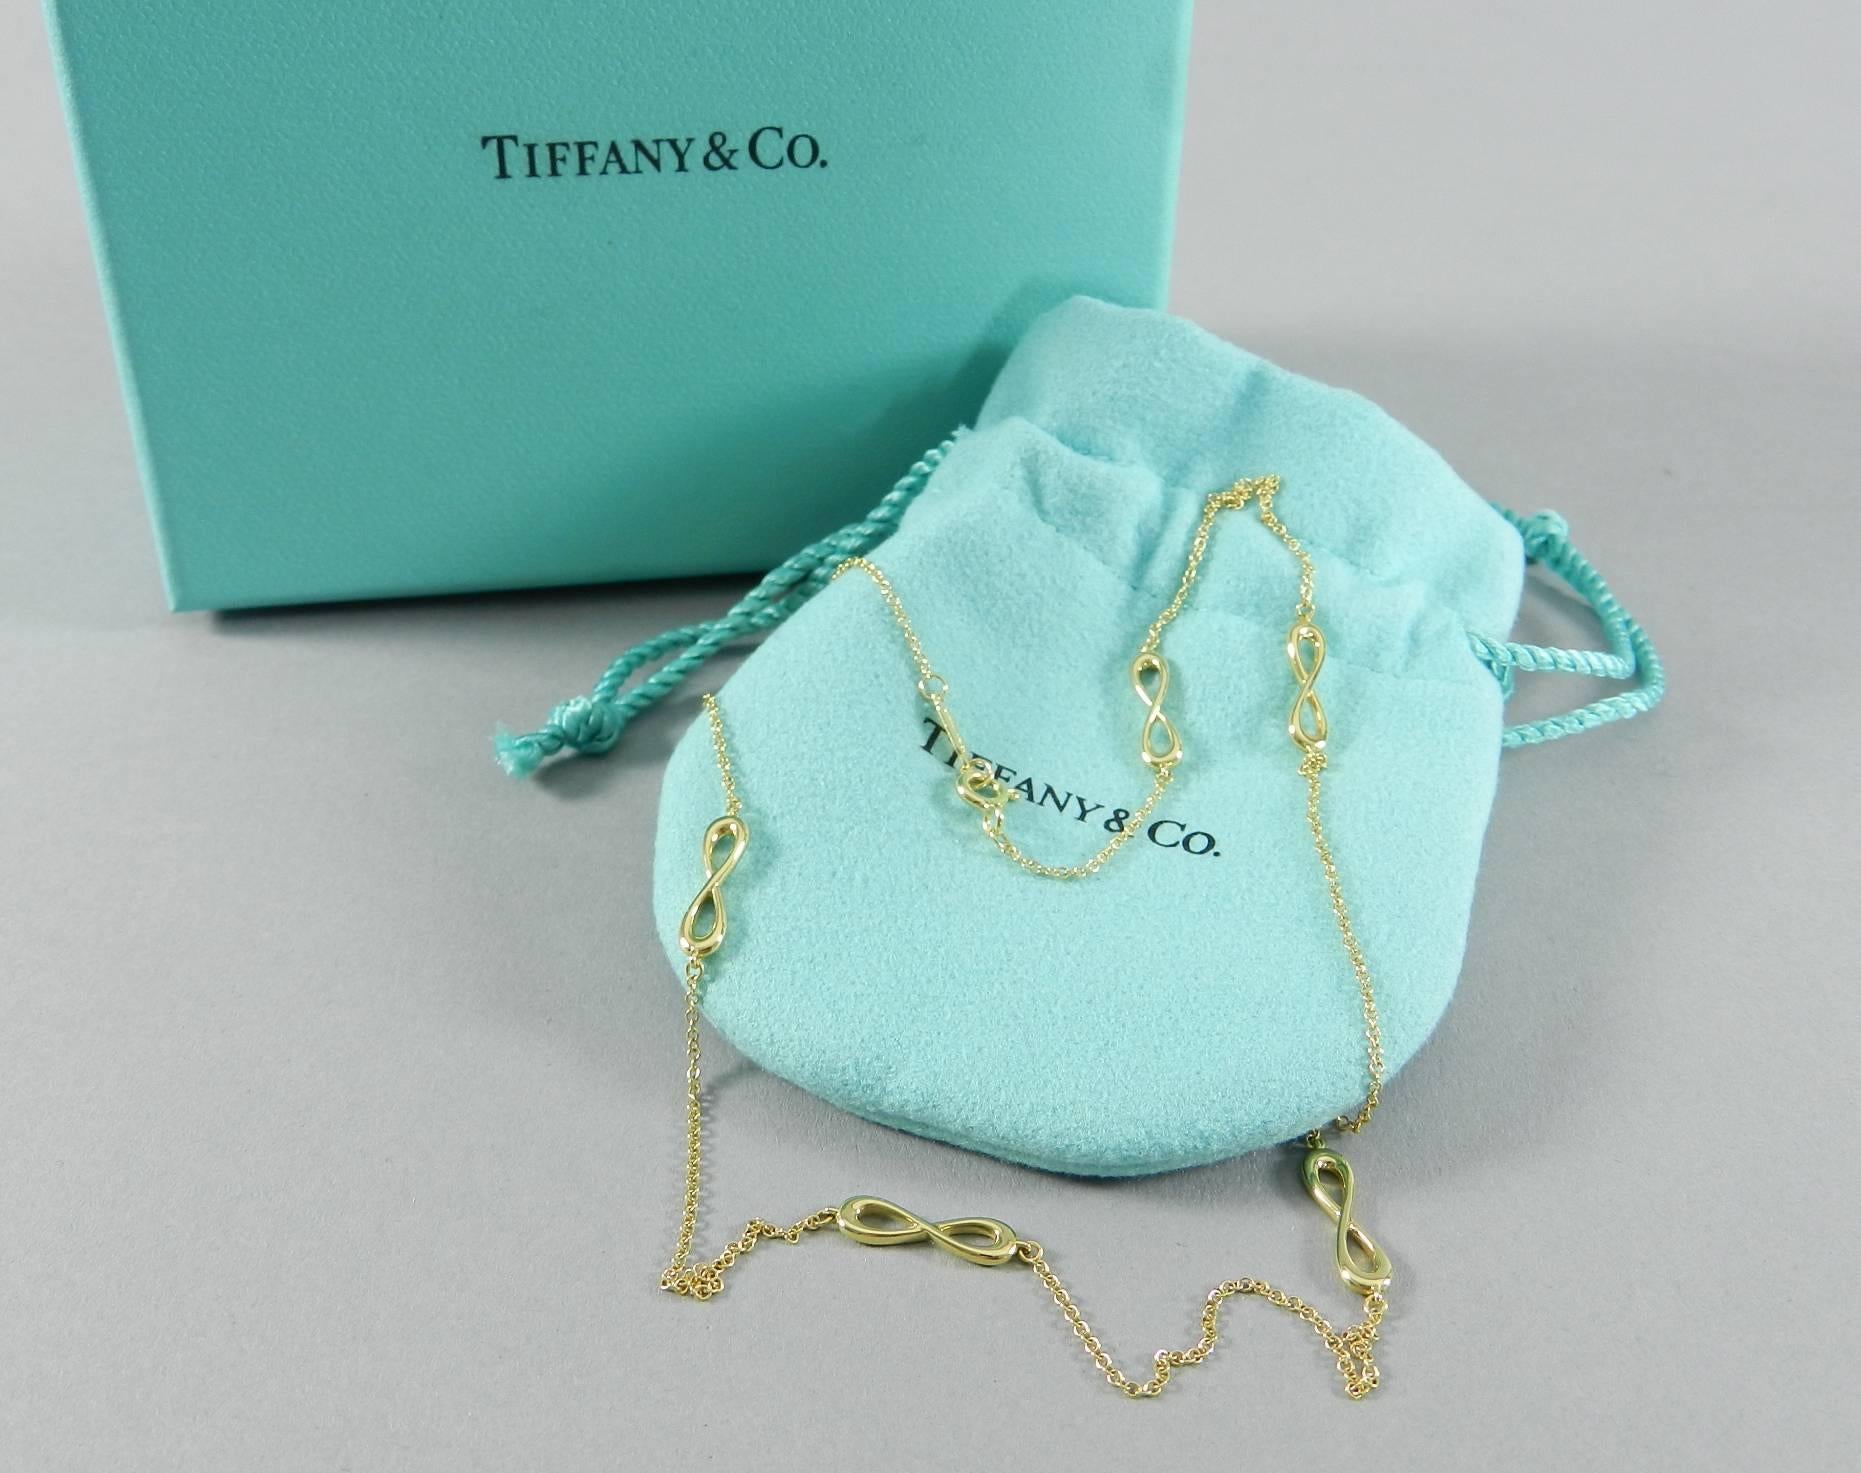 Tiffany and Co. 18k yellow gold infinity collection endless necklace. New and unworn with pouch and box. 18